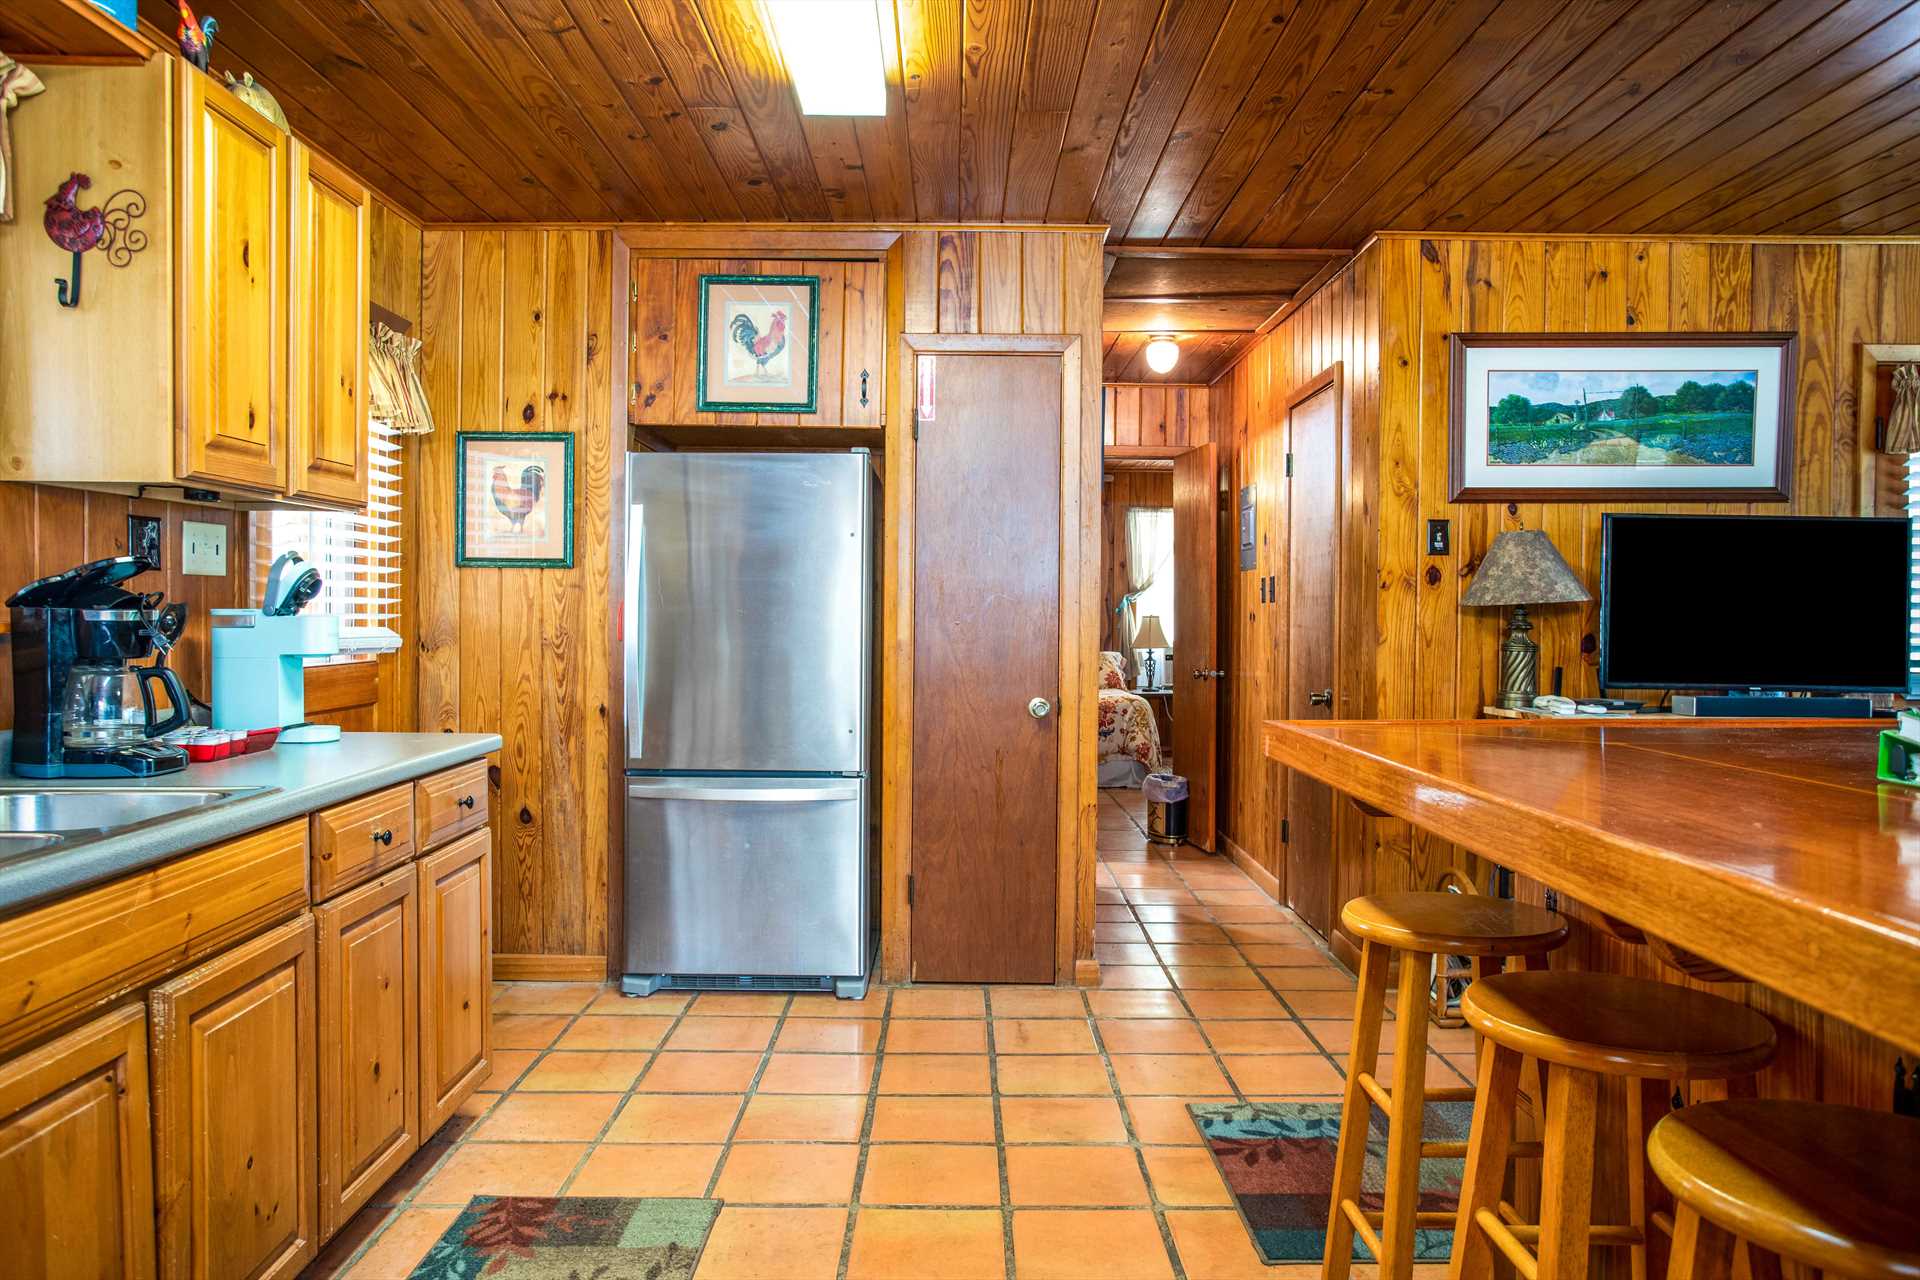                                                 Fun and homey decor can be found throughout the cabin, and this photo shows the sleeping areas are nicely separated from the kitchen and living areas.